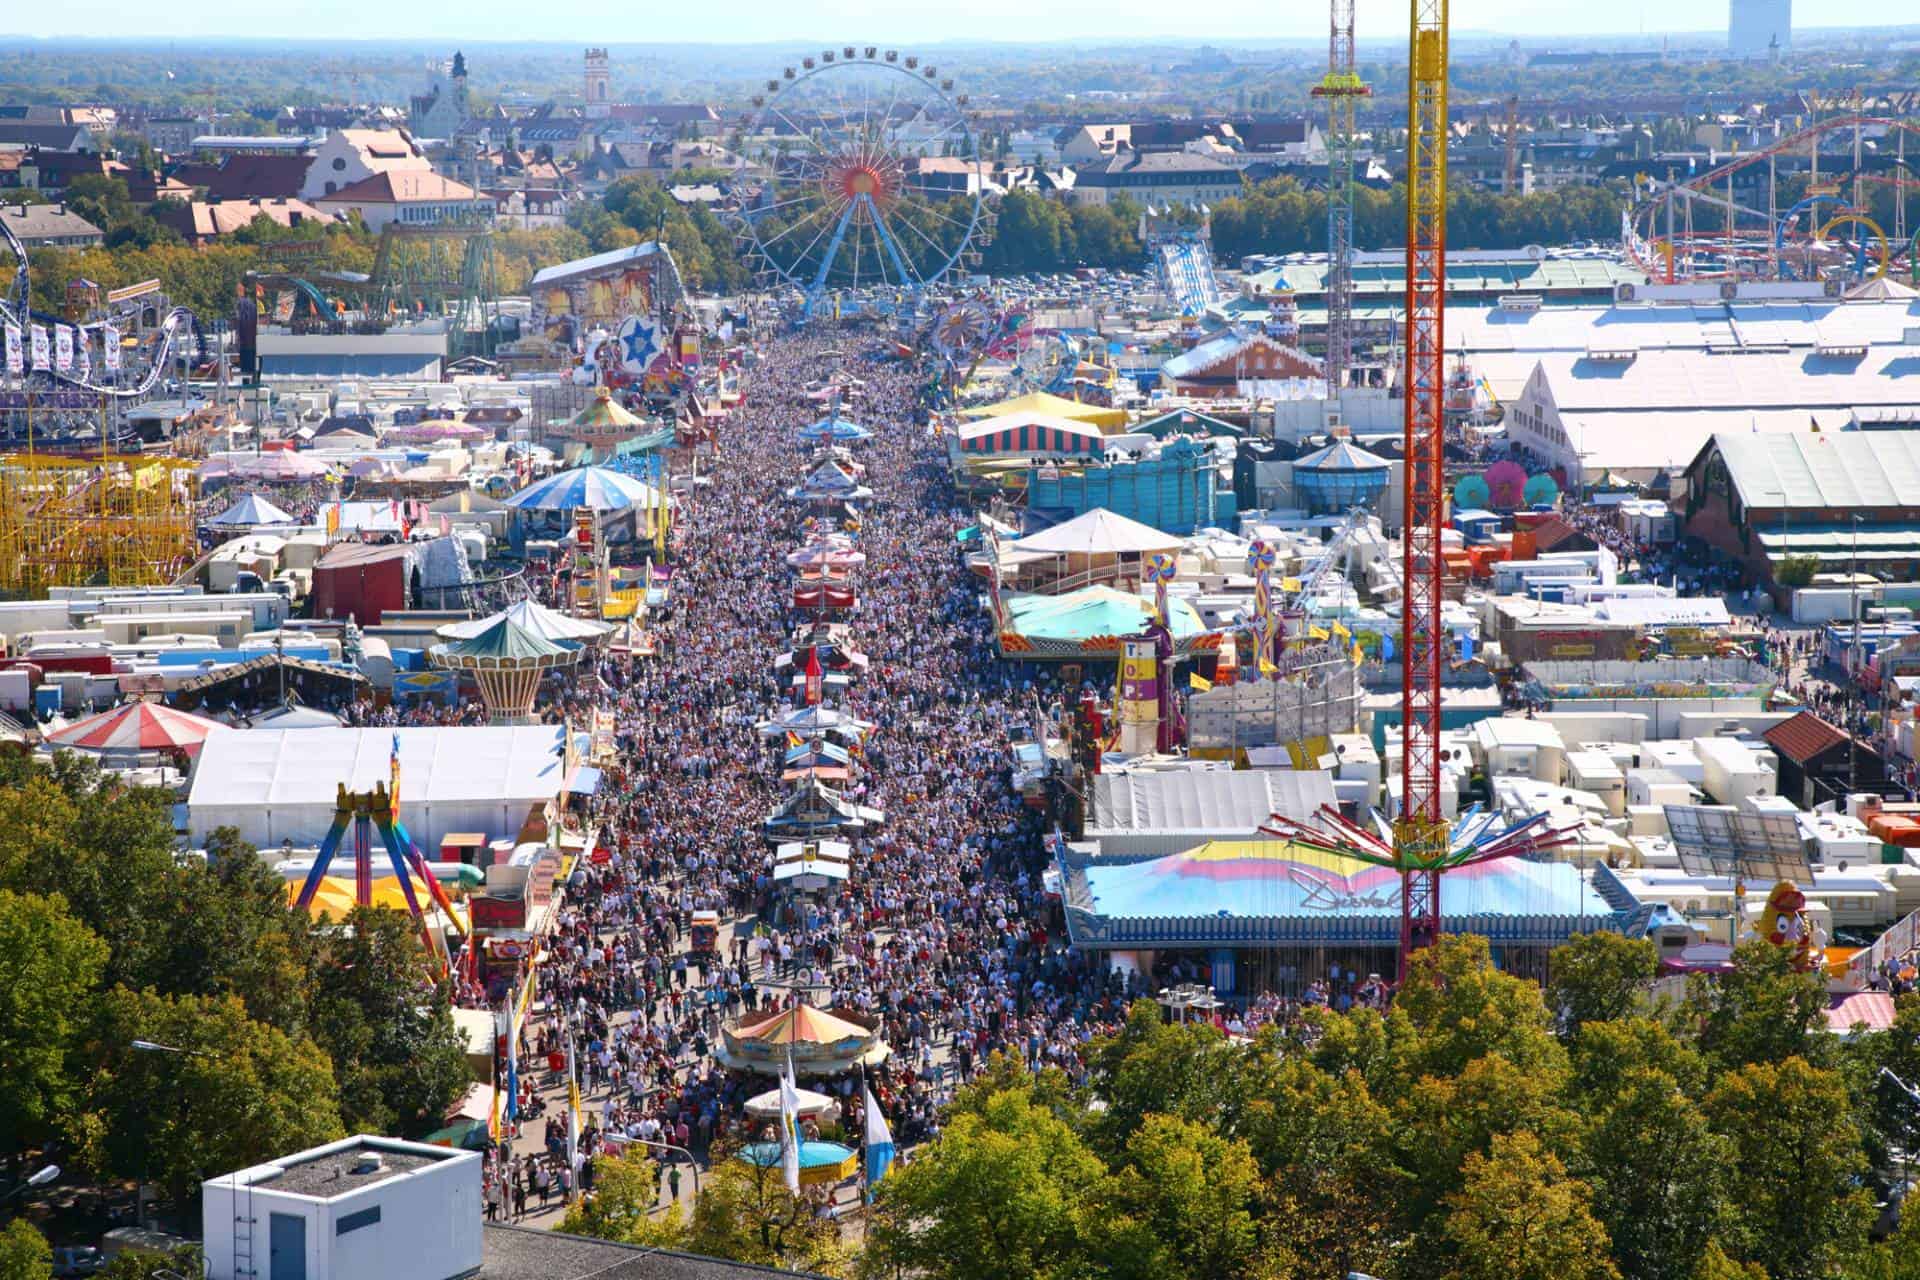 View of huge crowd, park attractions and tents during Oktoberfest in Munich.